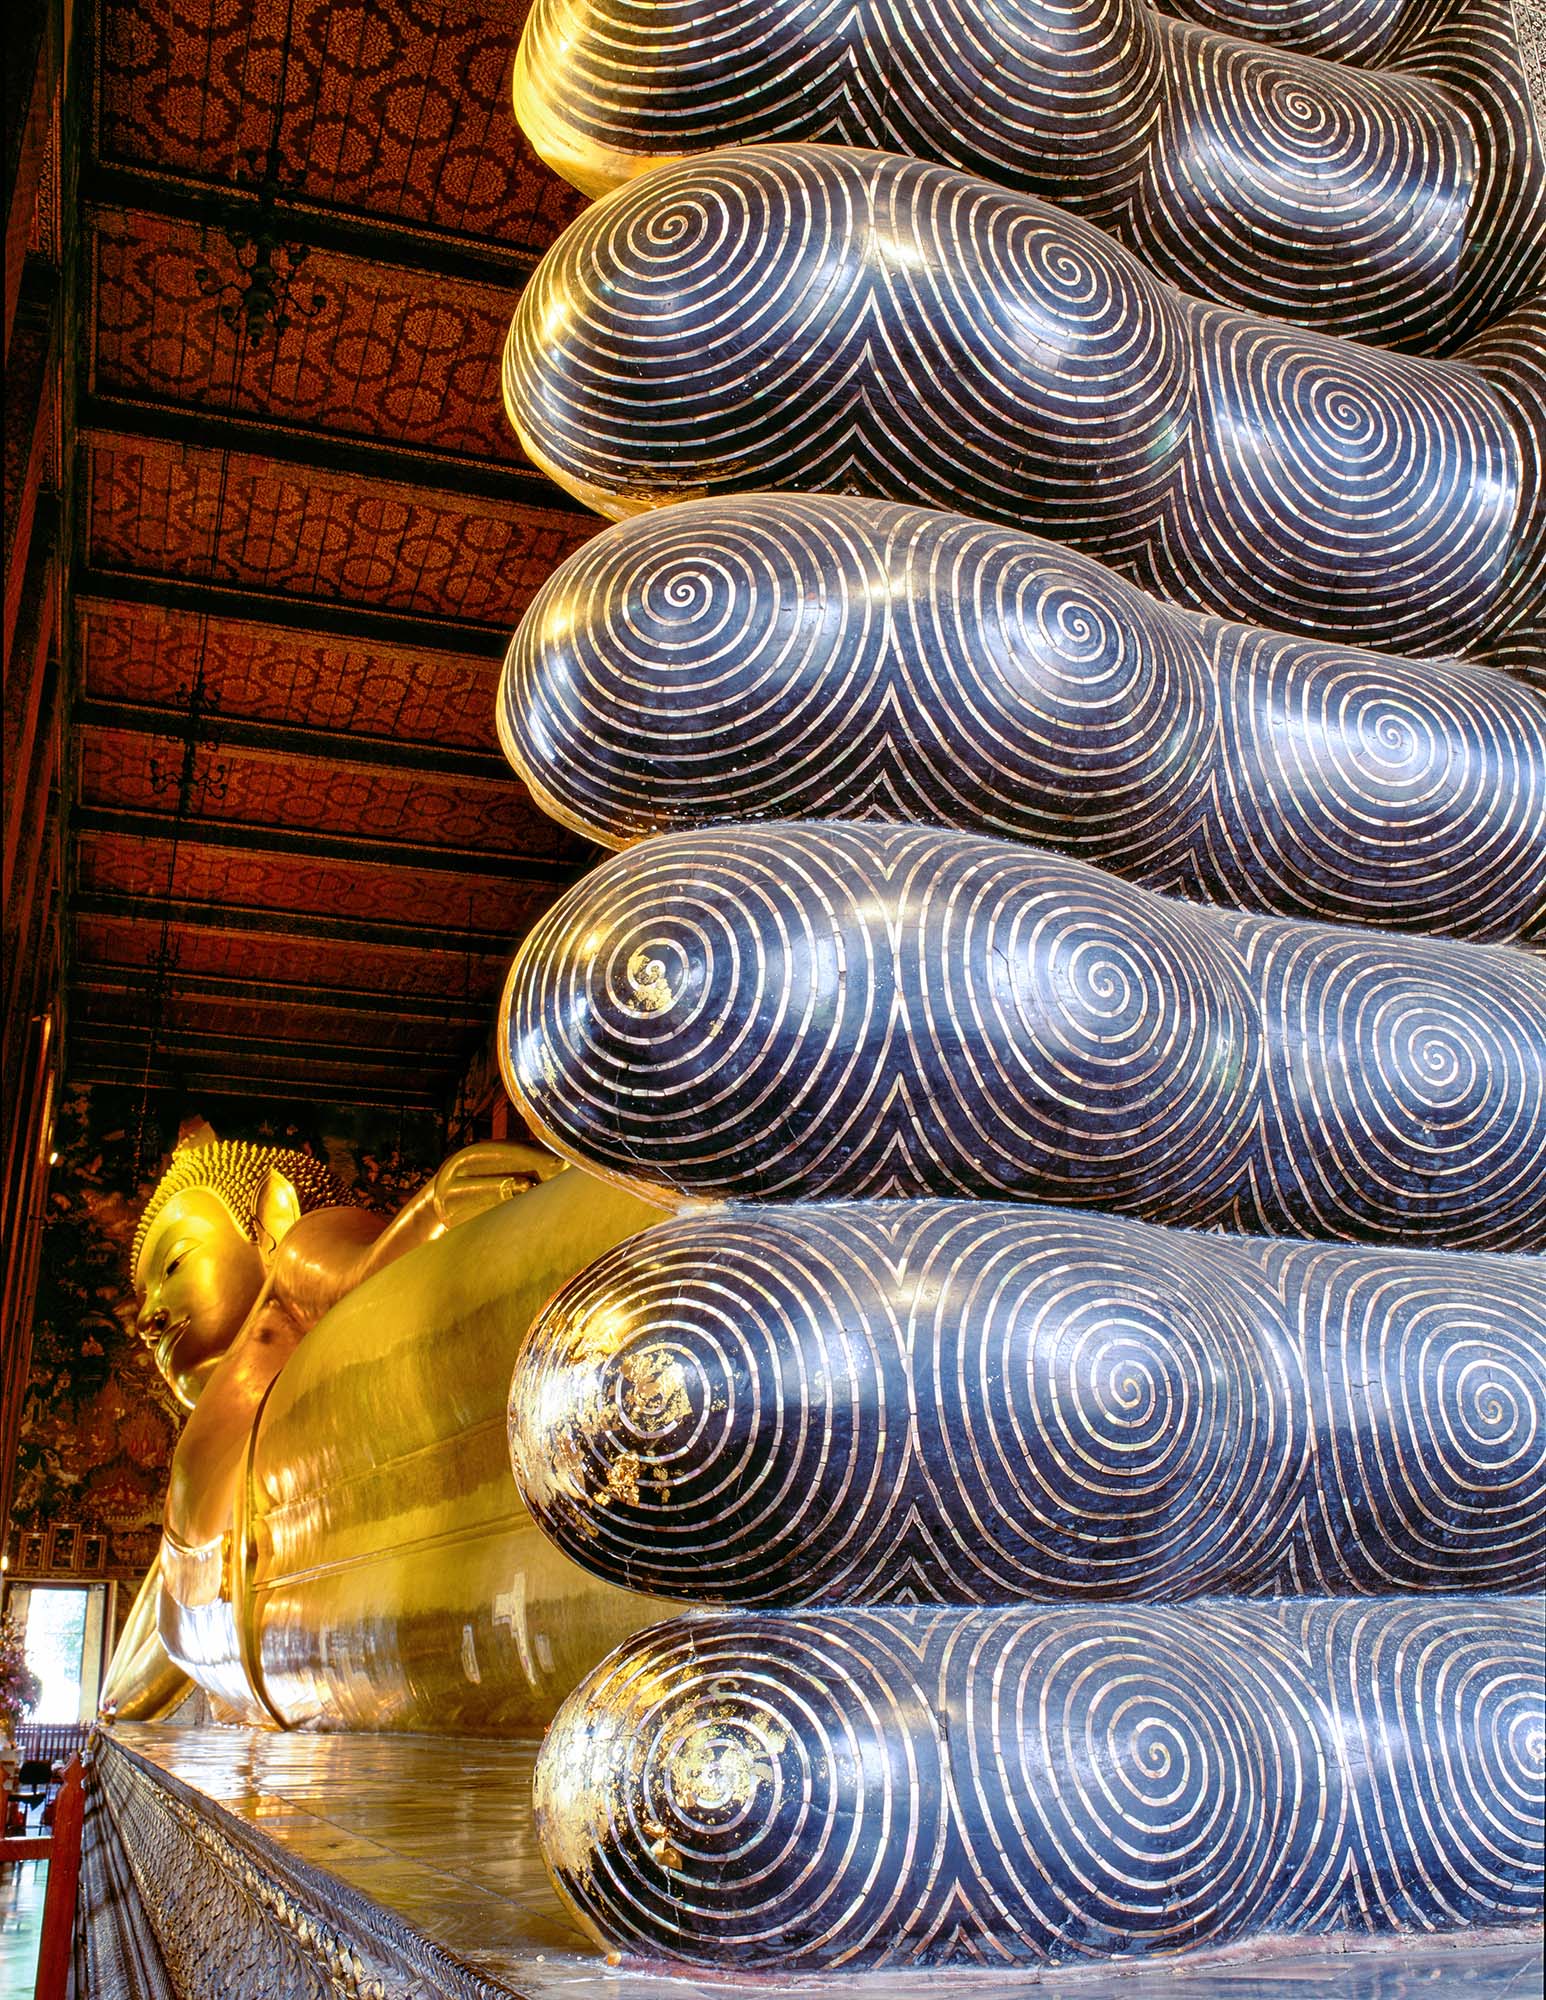 Wat Pho holds Thailand's largest reclining Buddha. This gold plated Buddha is 46 meters long and 15 meters high, and illustrates...